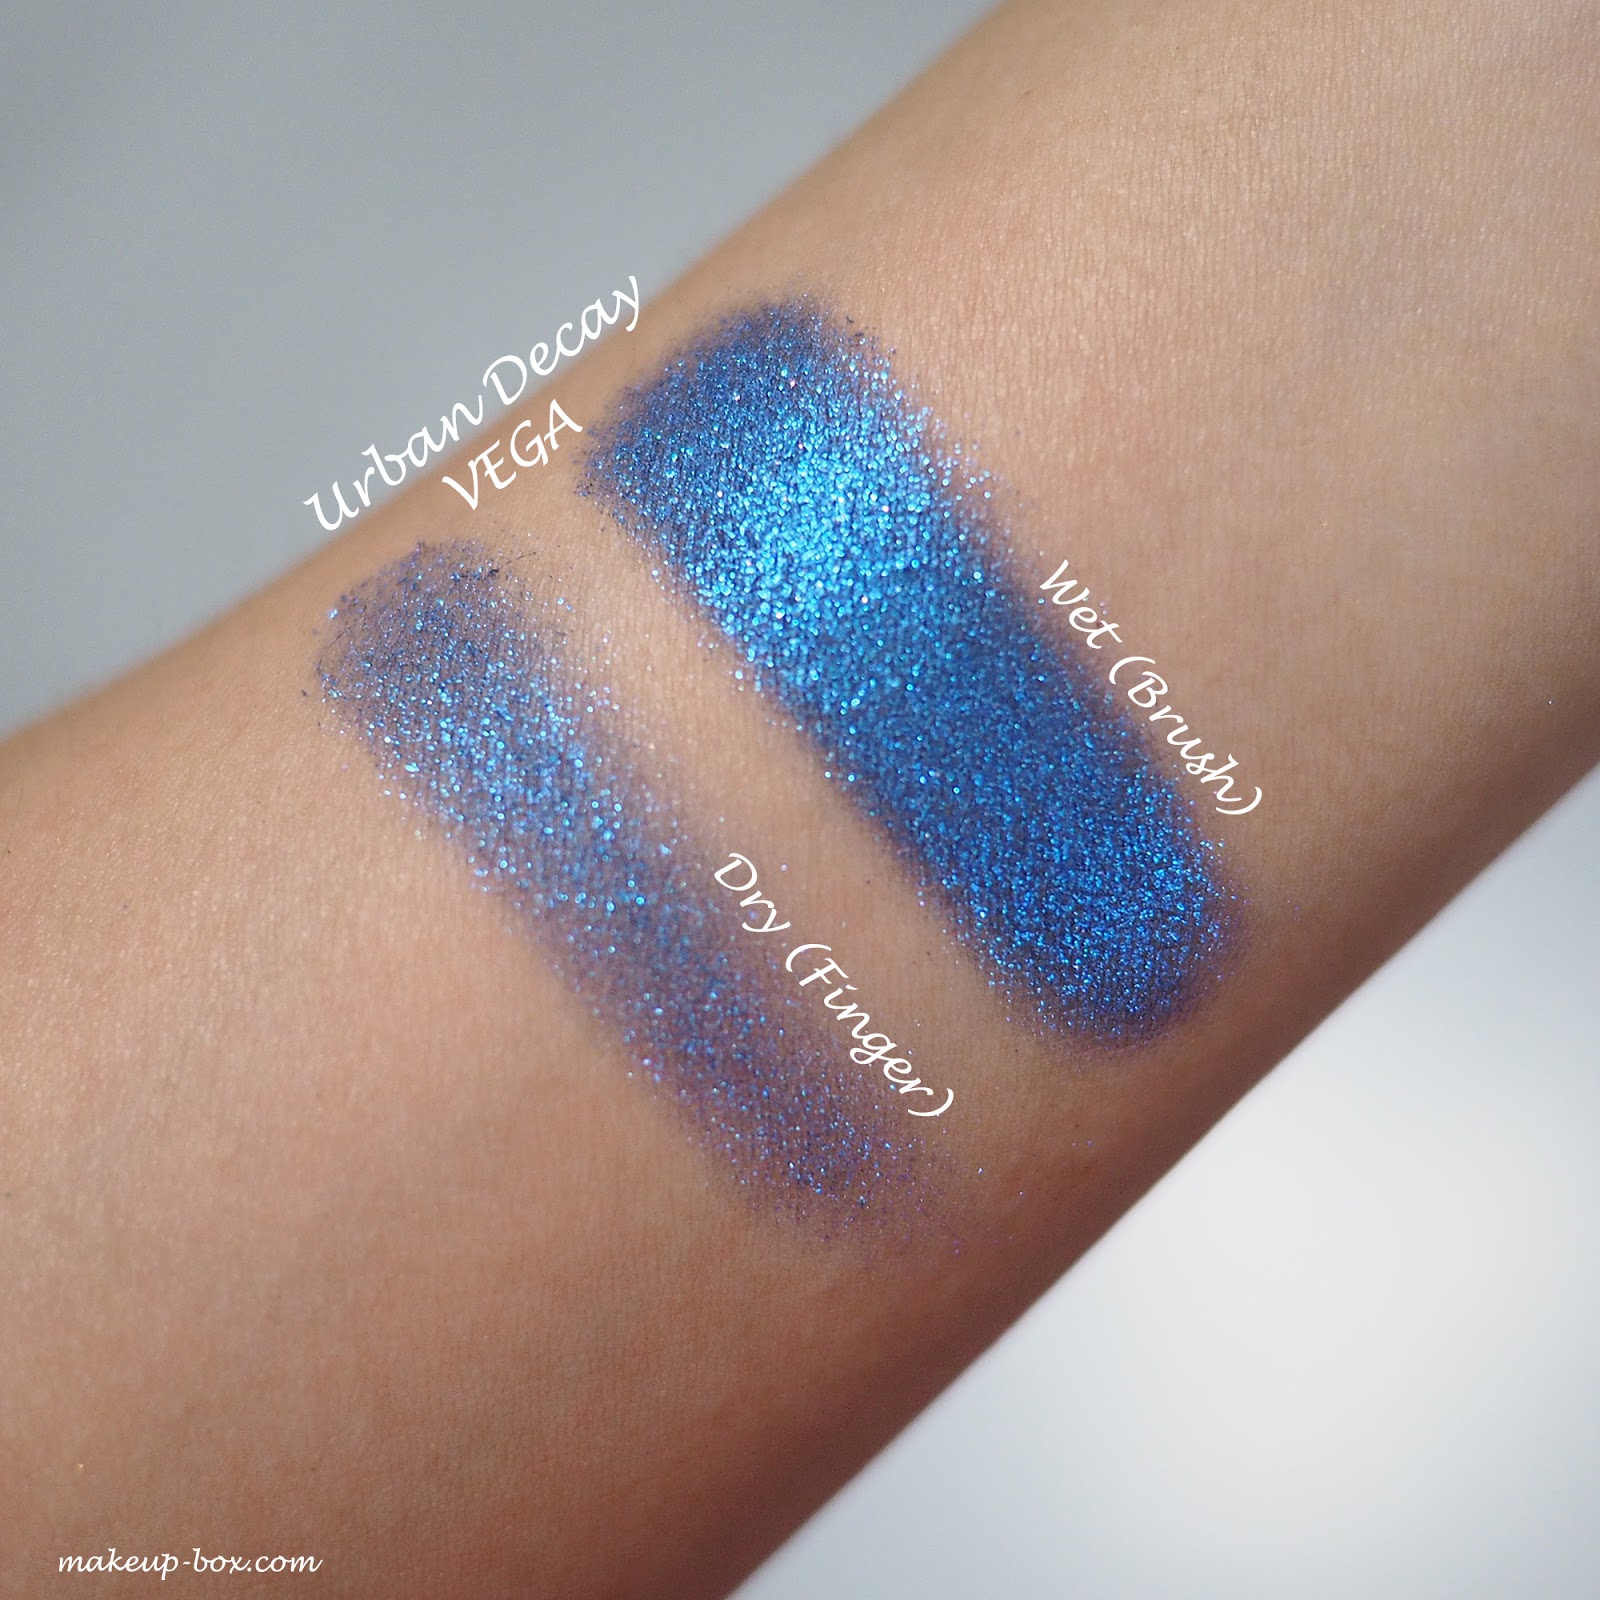 Urban Decay Moondust - a sparkly obsession.